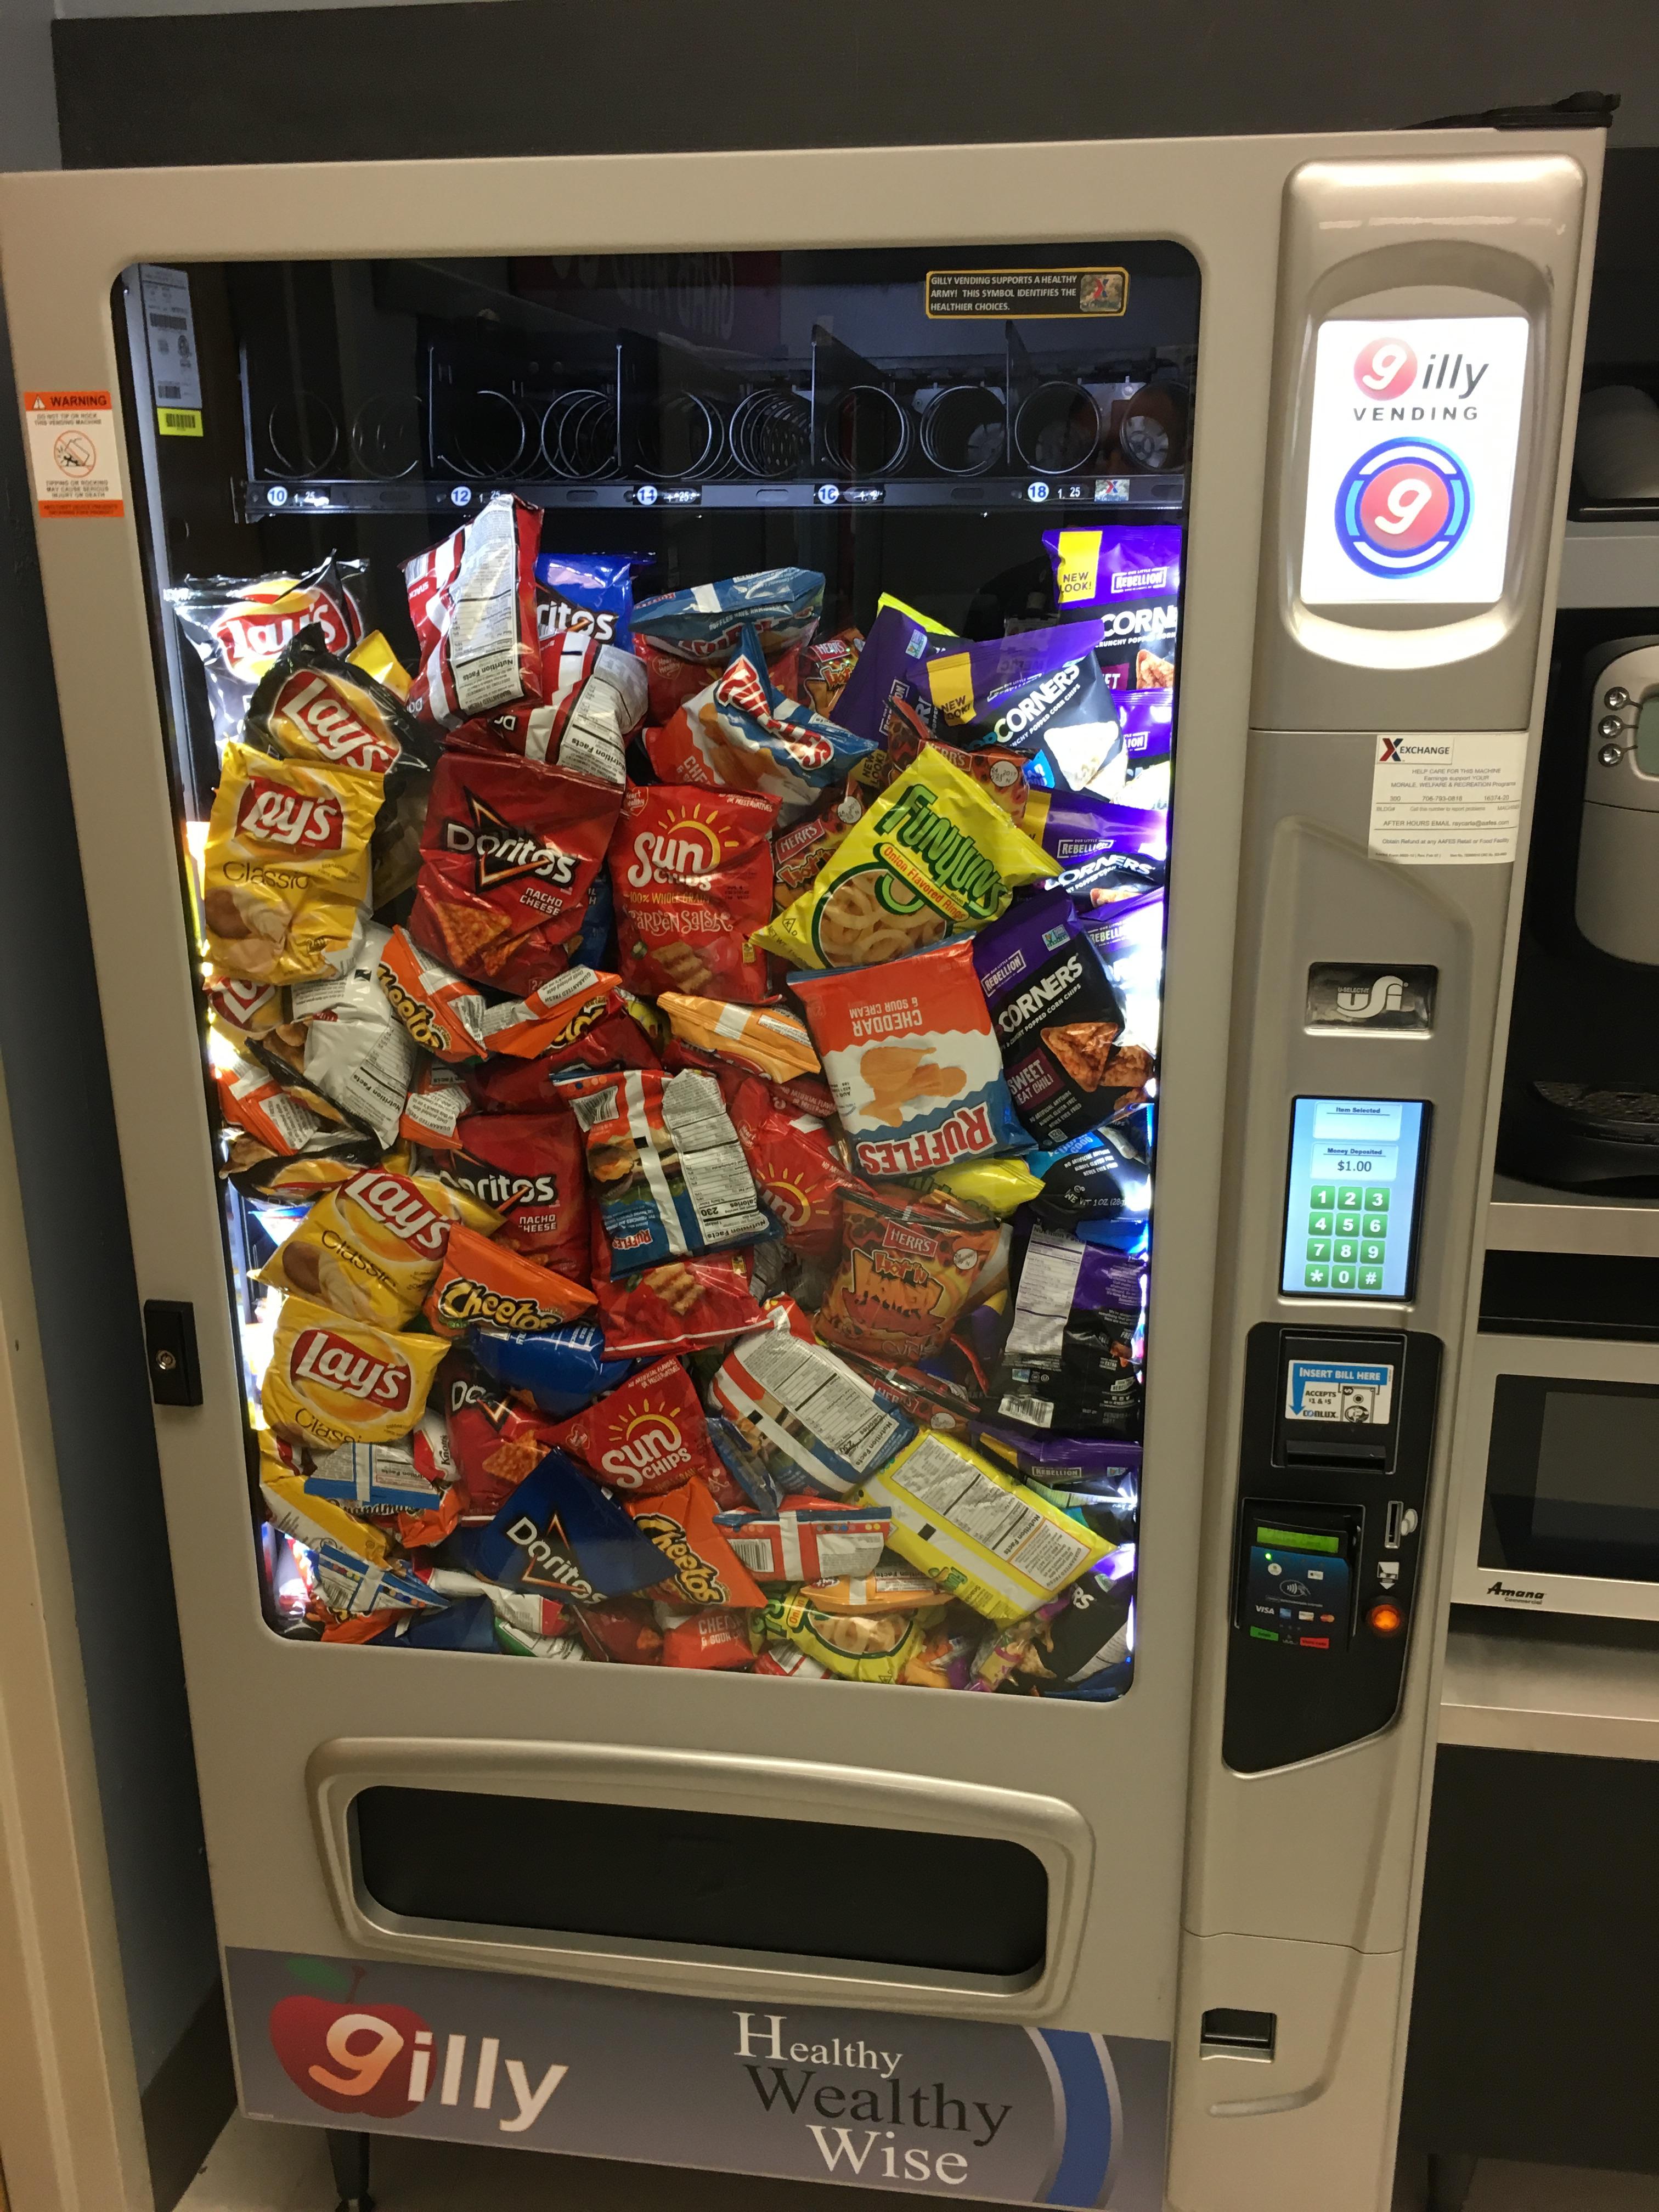 This is what happens when a vending machine distributes all its items